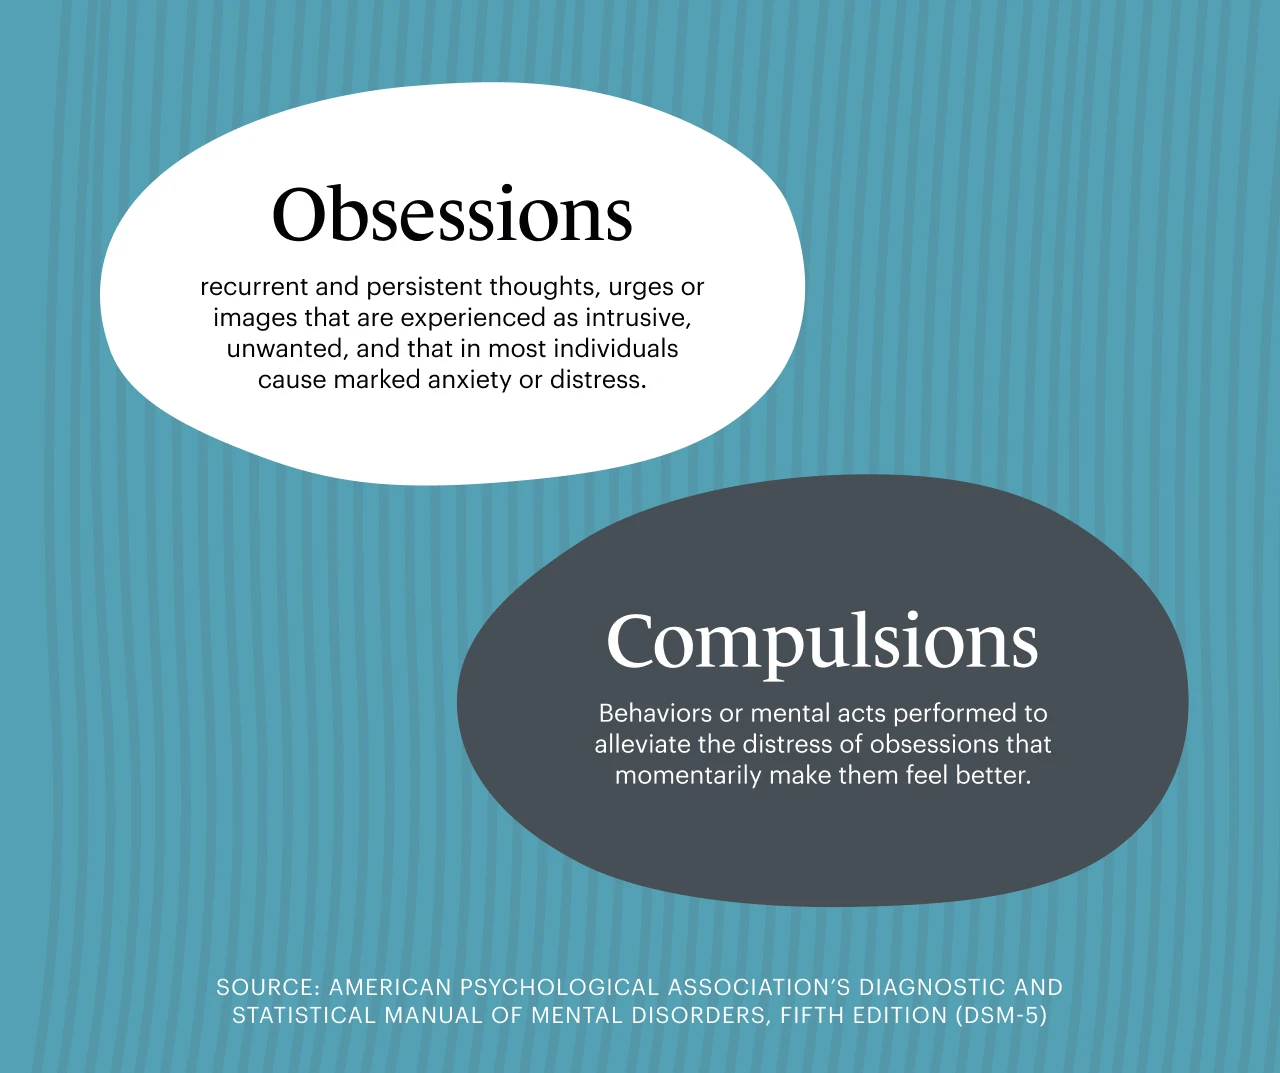 A Monarch original infographic showing the definition of obsessions and compulsions that are symptoms of ocd, obsessive compulsive disorder.